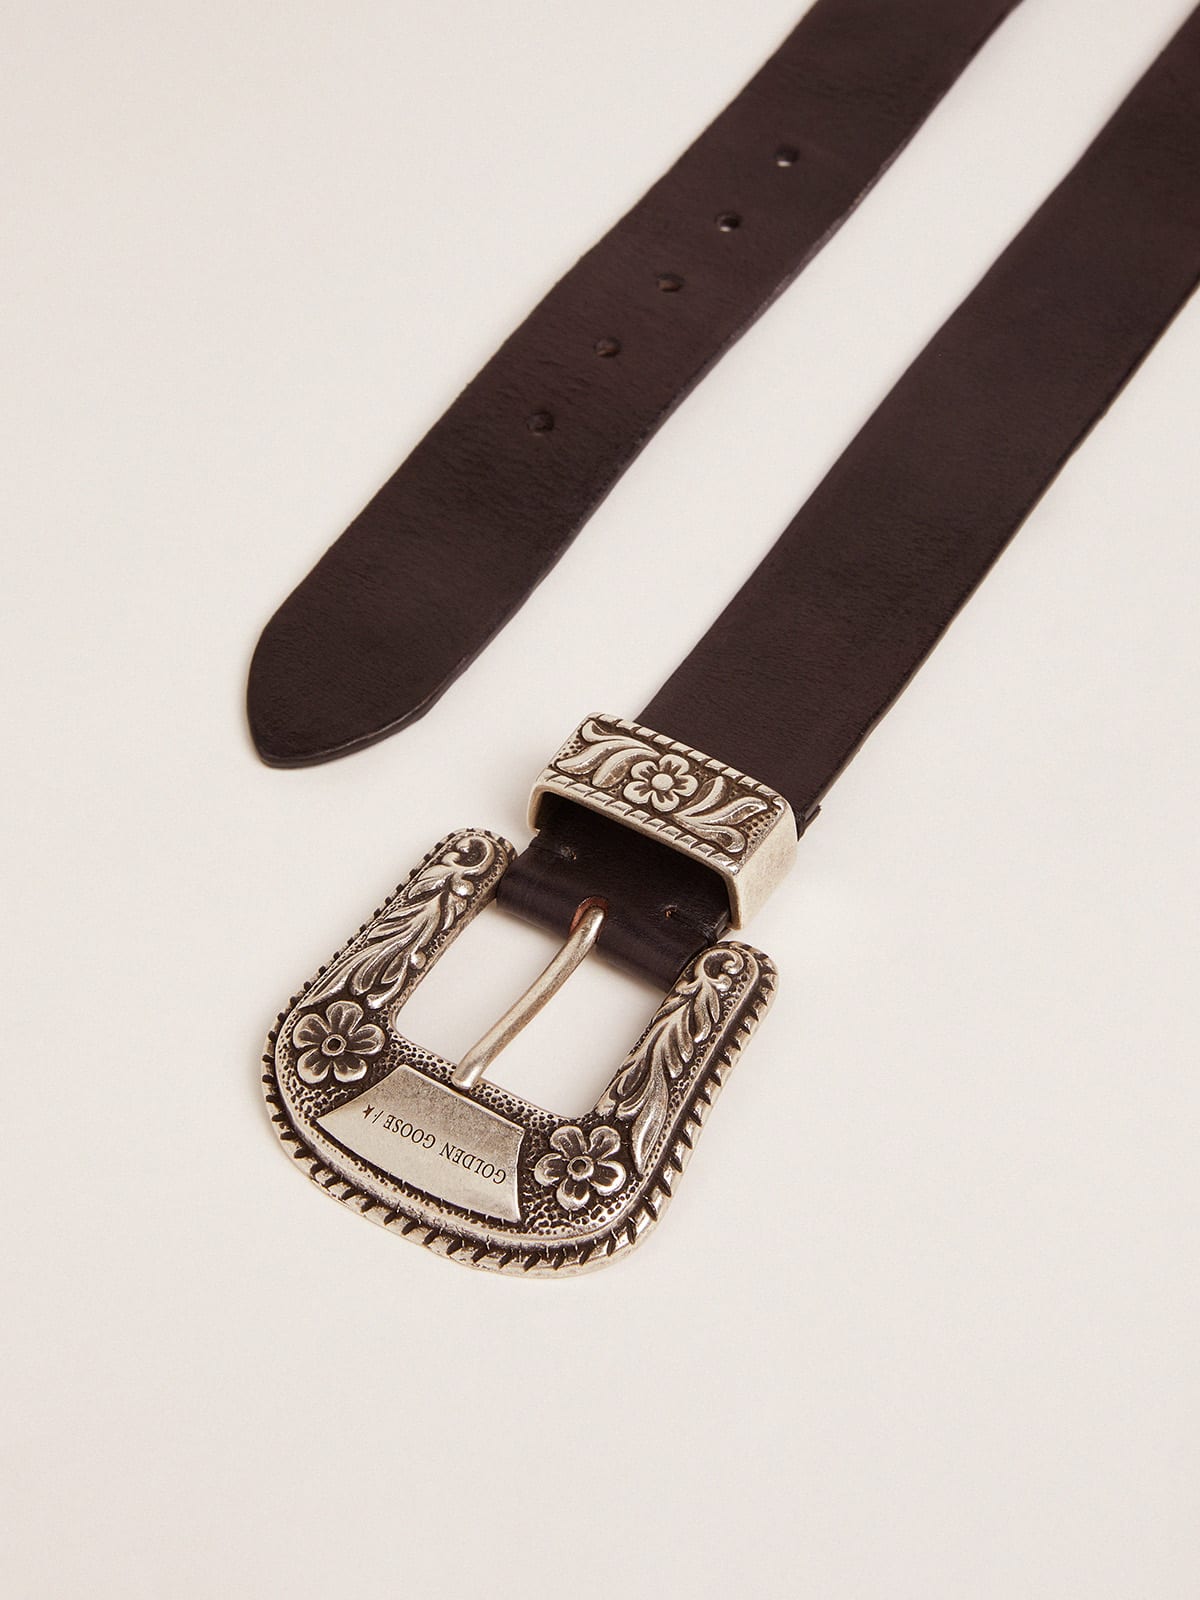 Golden Goose - Lace belt in black leather with silver color decorated buckle in 